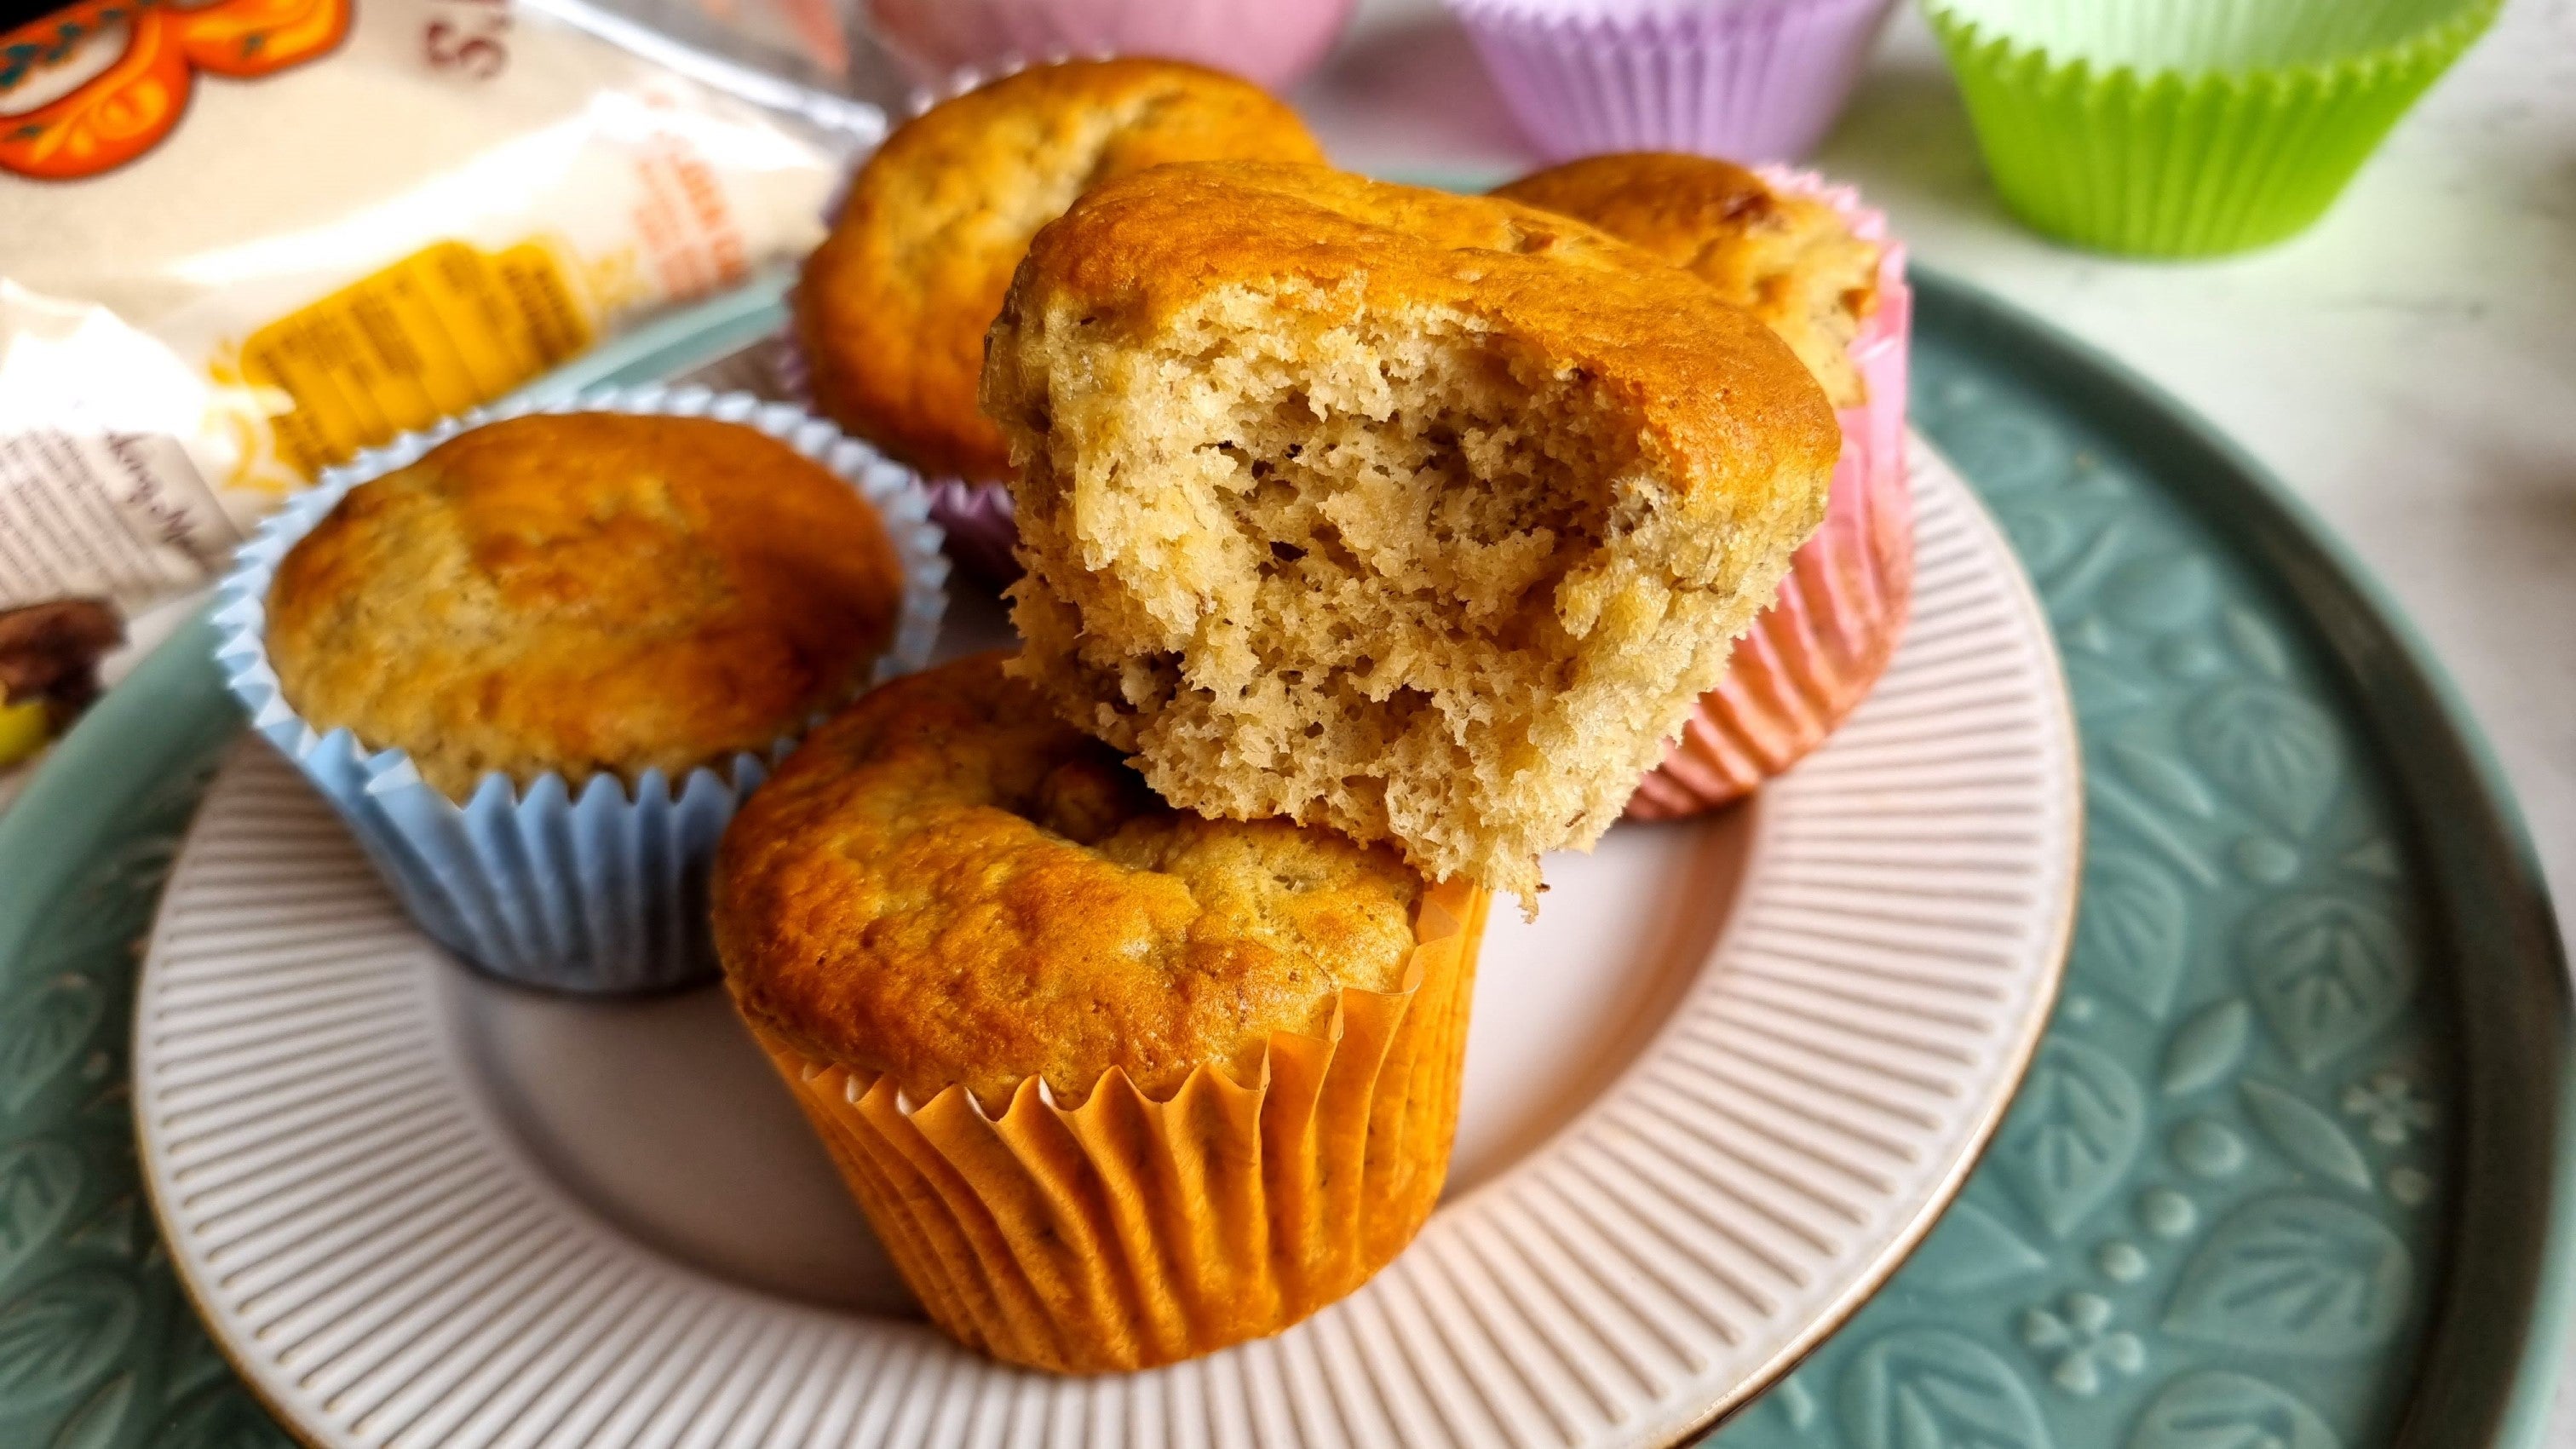 Plate of freshly-baked banana muffins with a bite taken out of one muffin